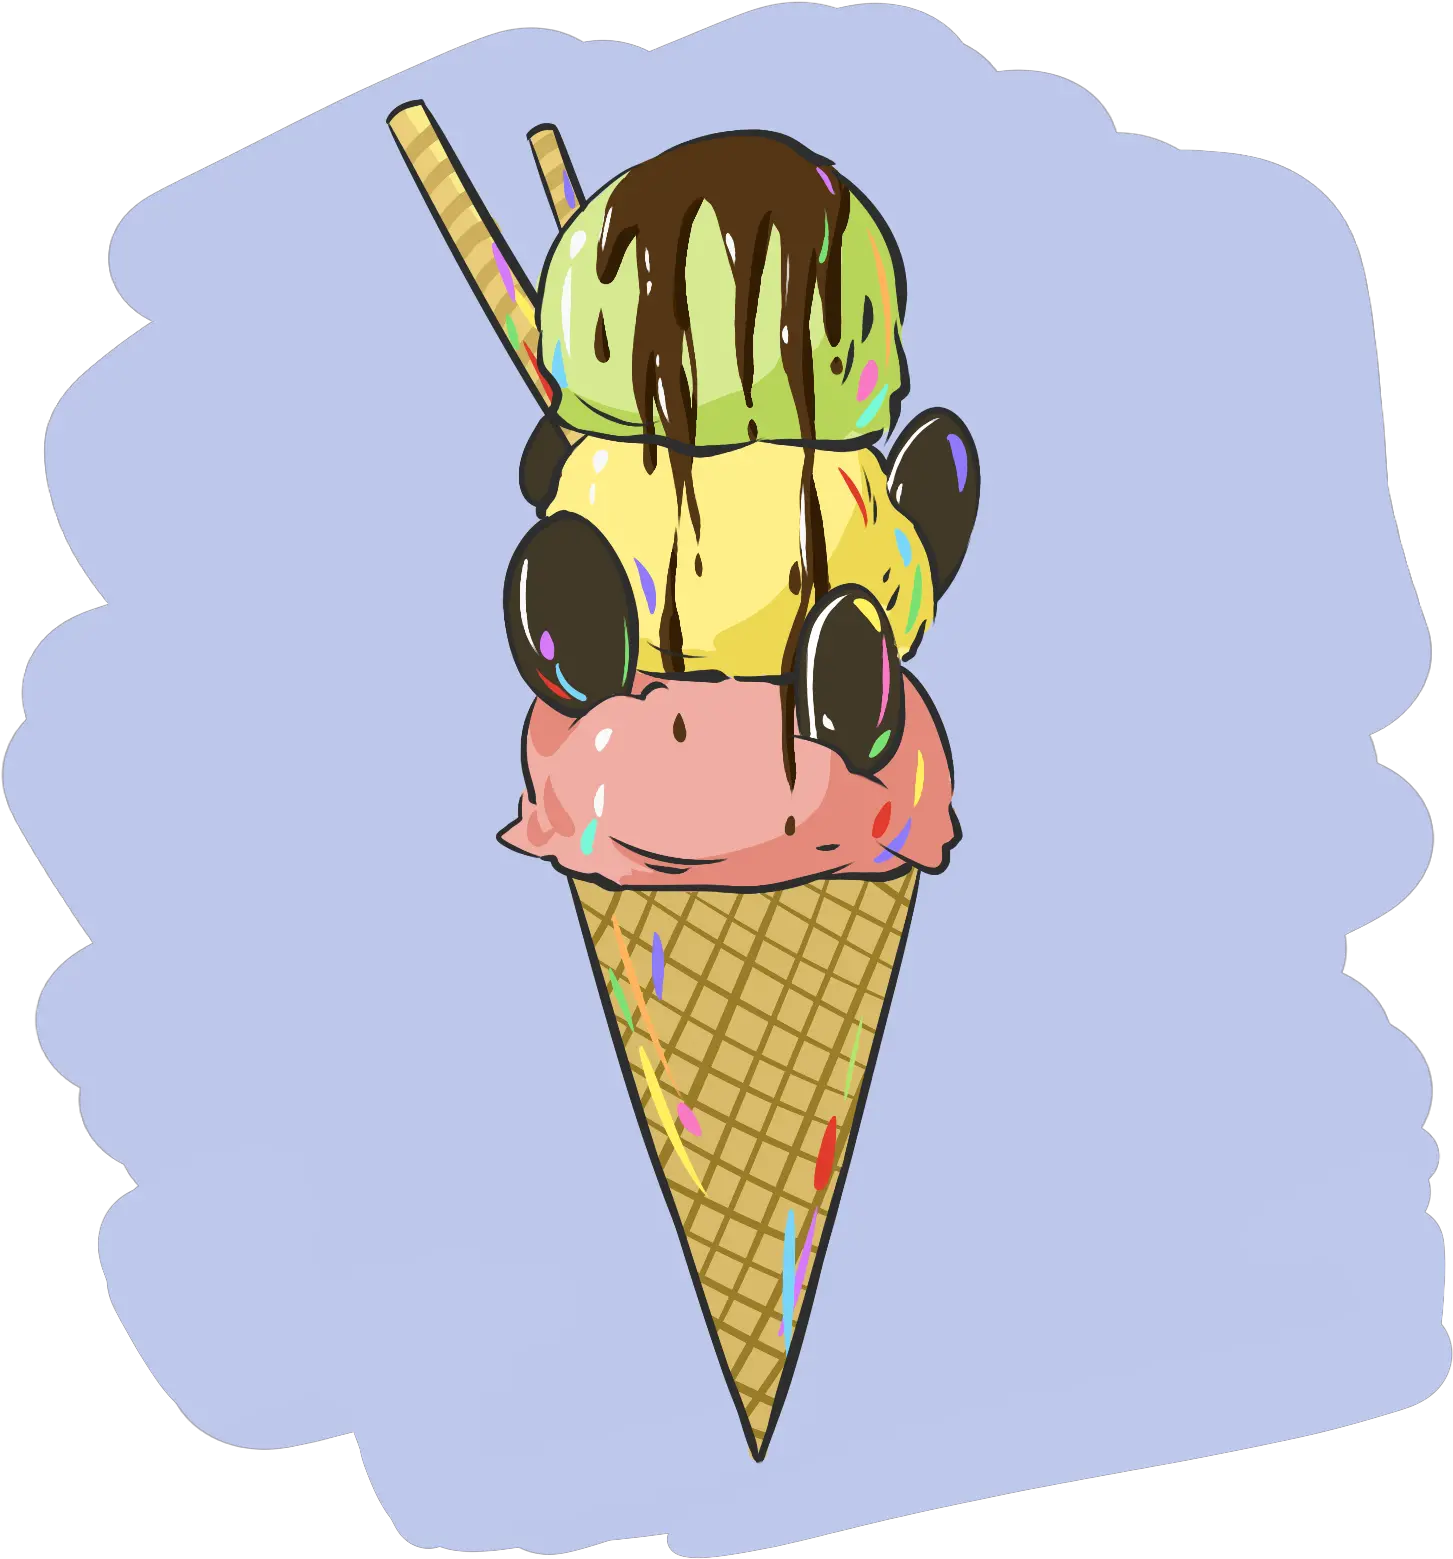 Ice Cream Cone Biscuit Chocolate Sauce Food Png Sauce Png